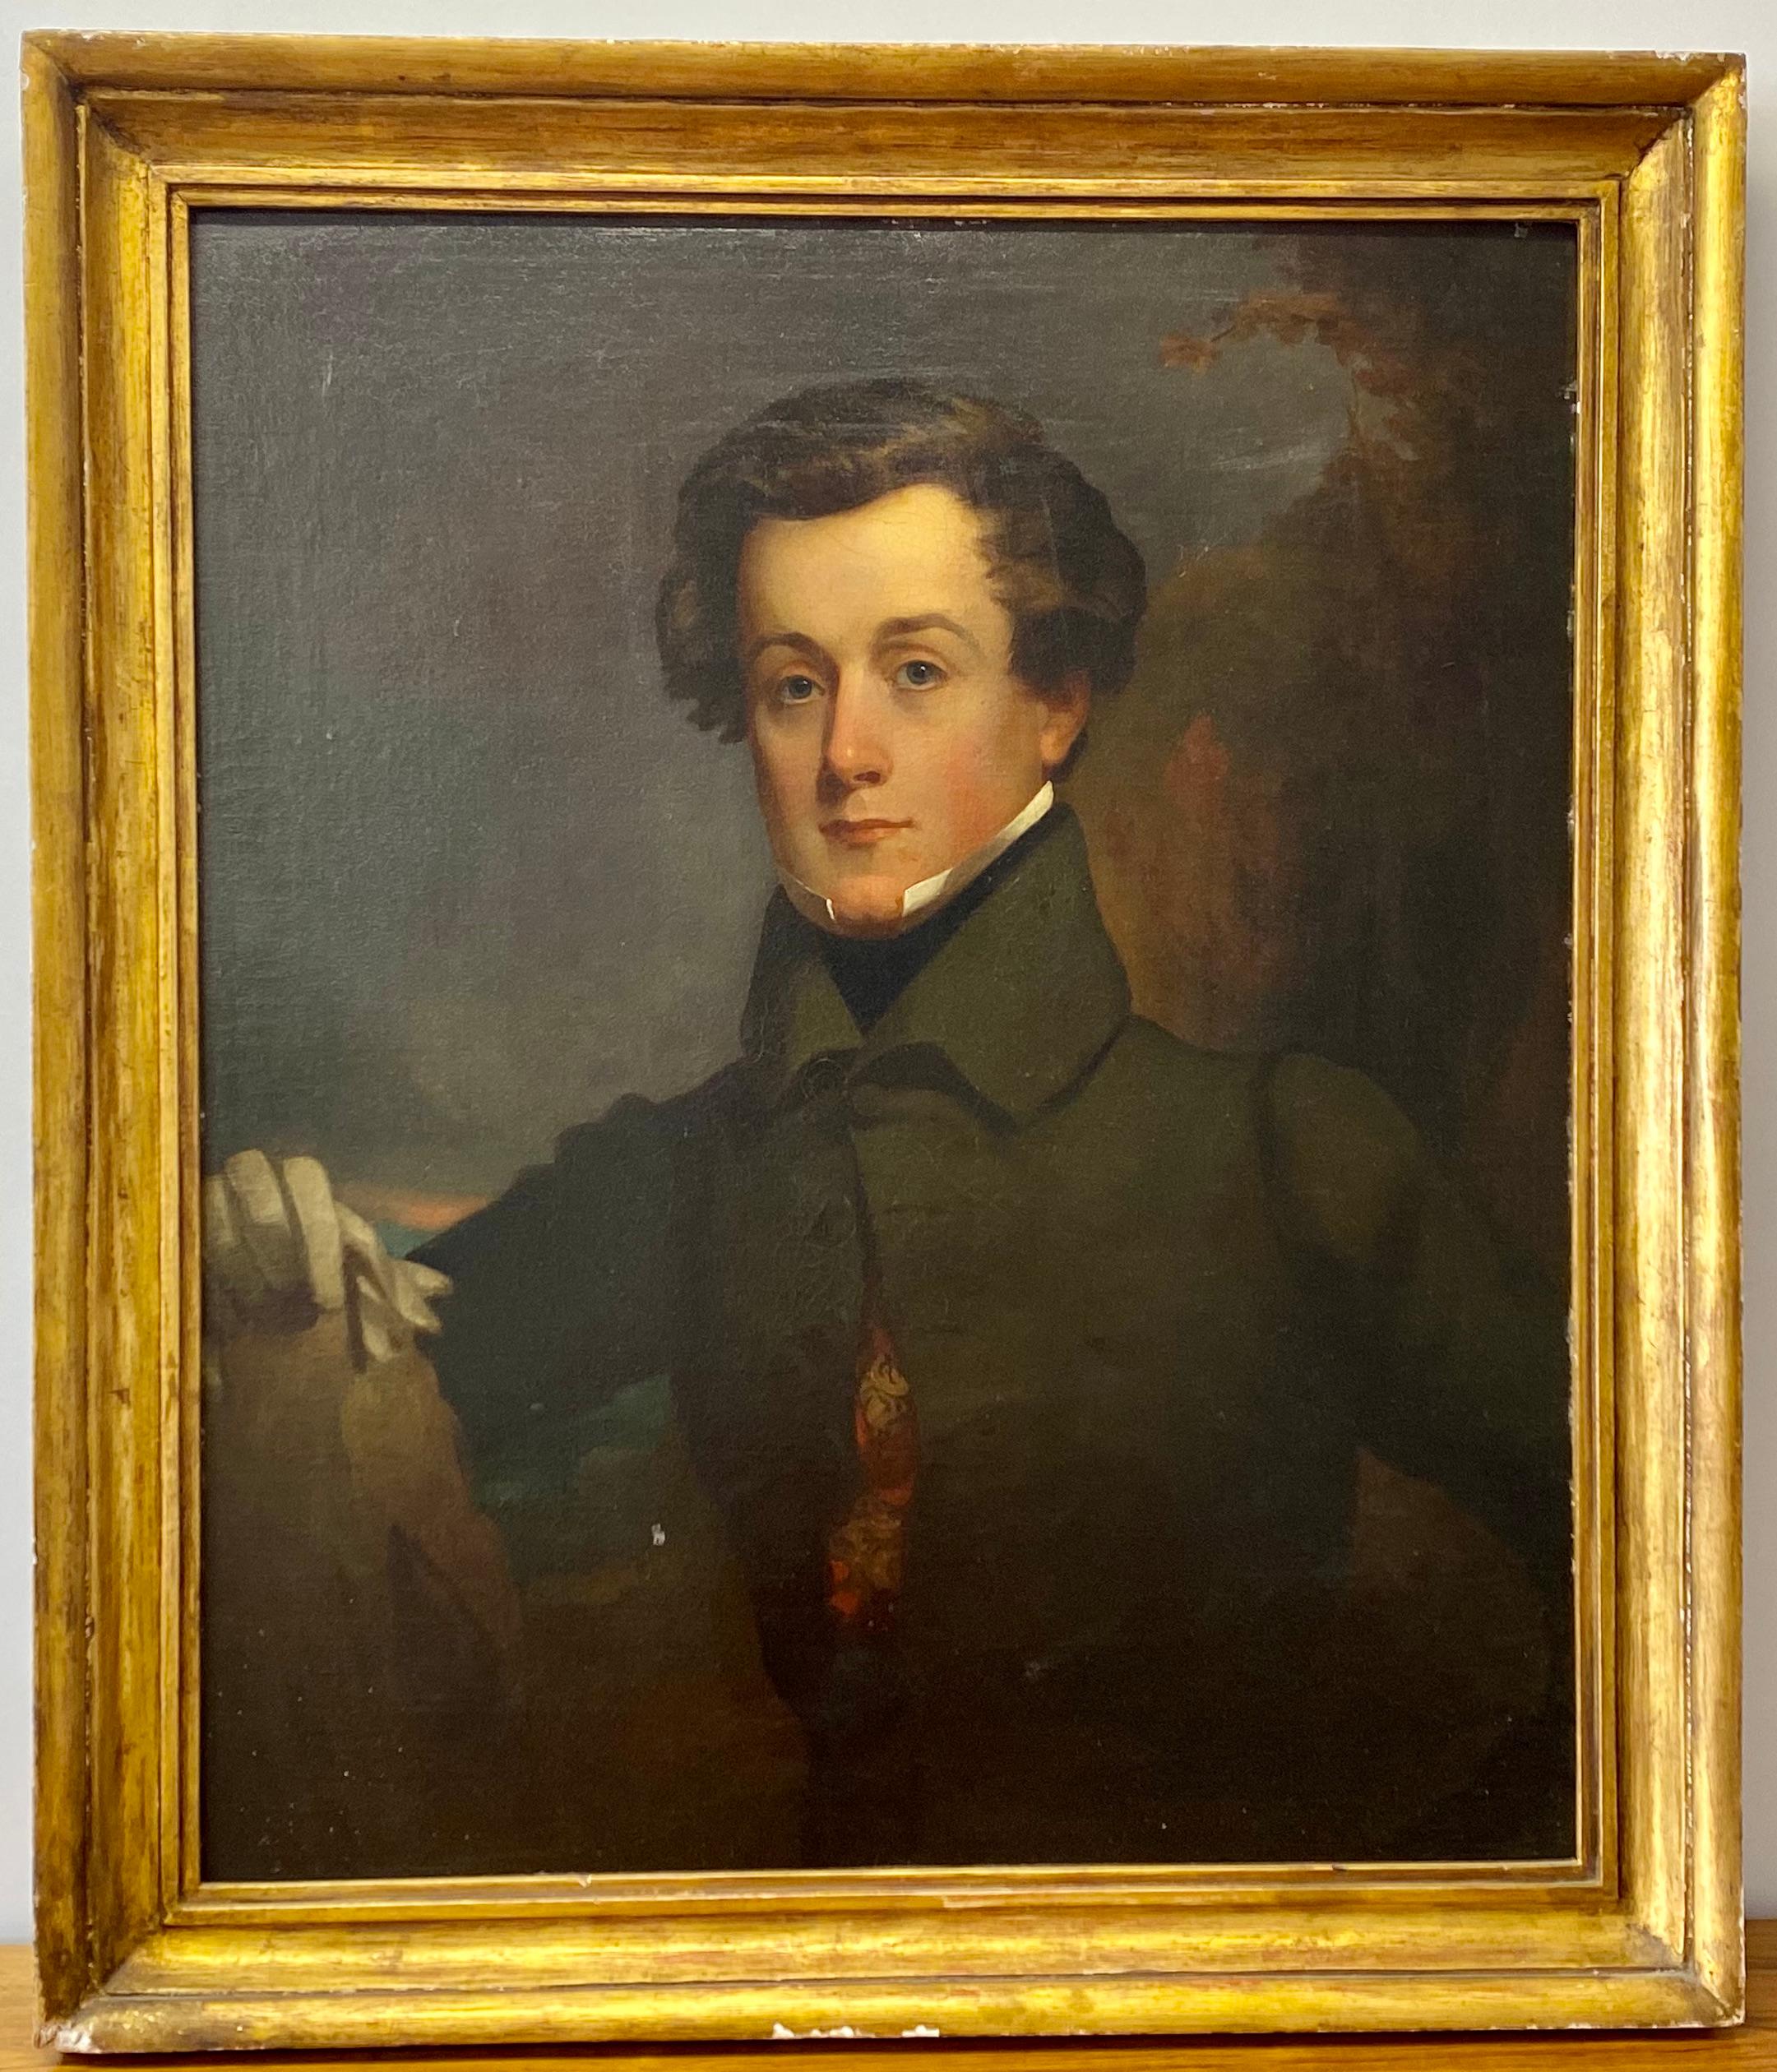 Unknown Portrait Painting - Early 19th Century Portrait of a Gentleman 1800-1820